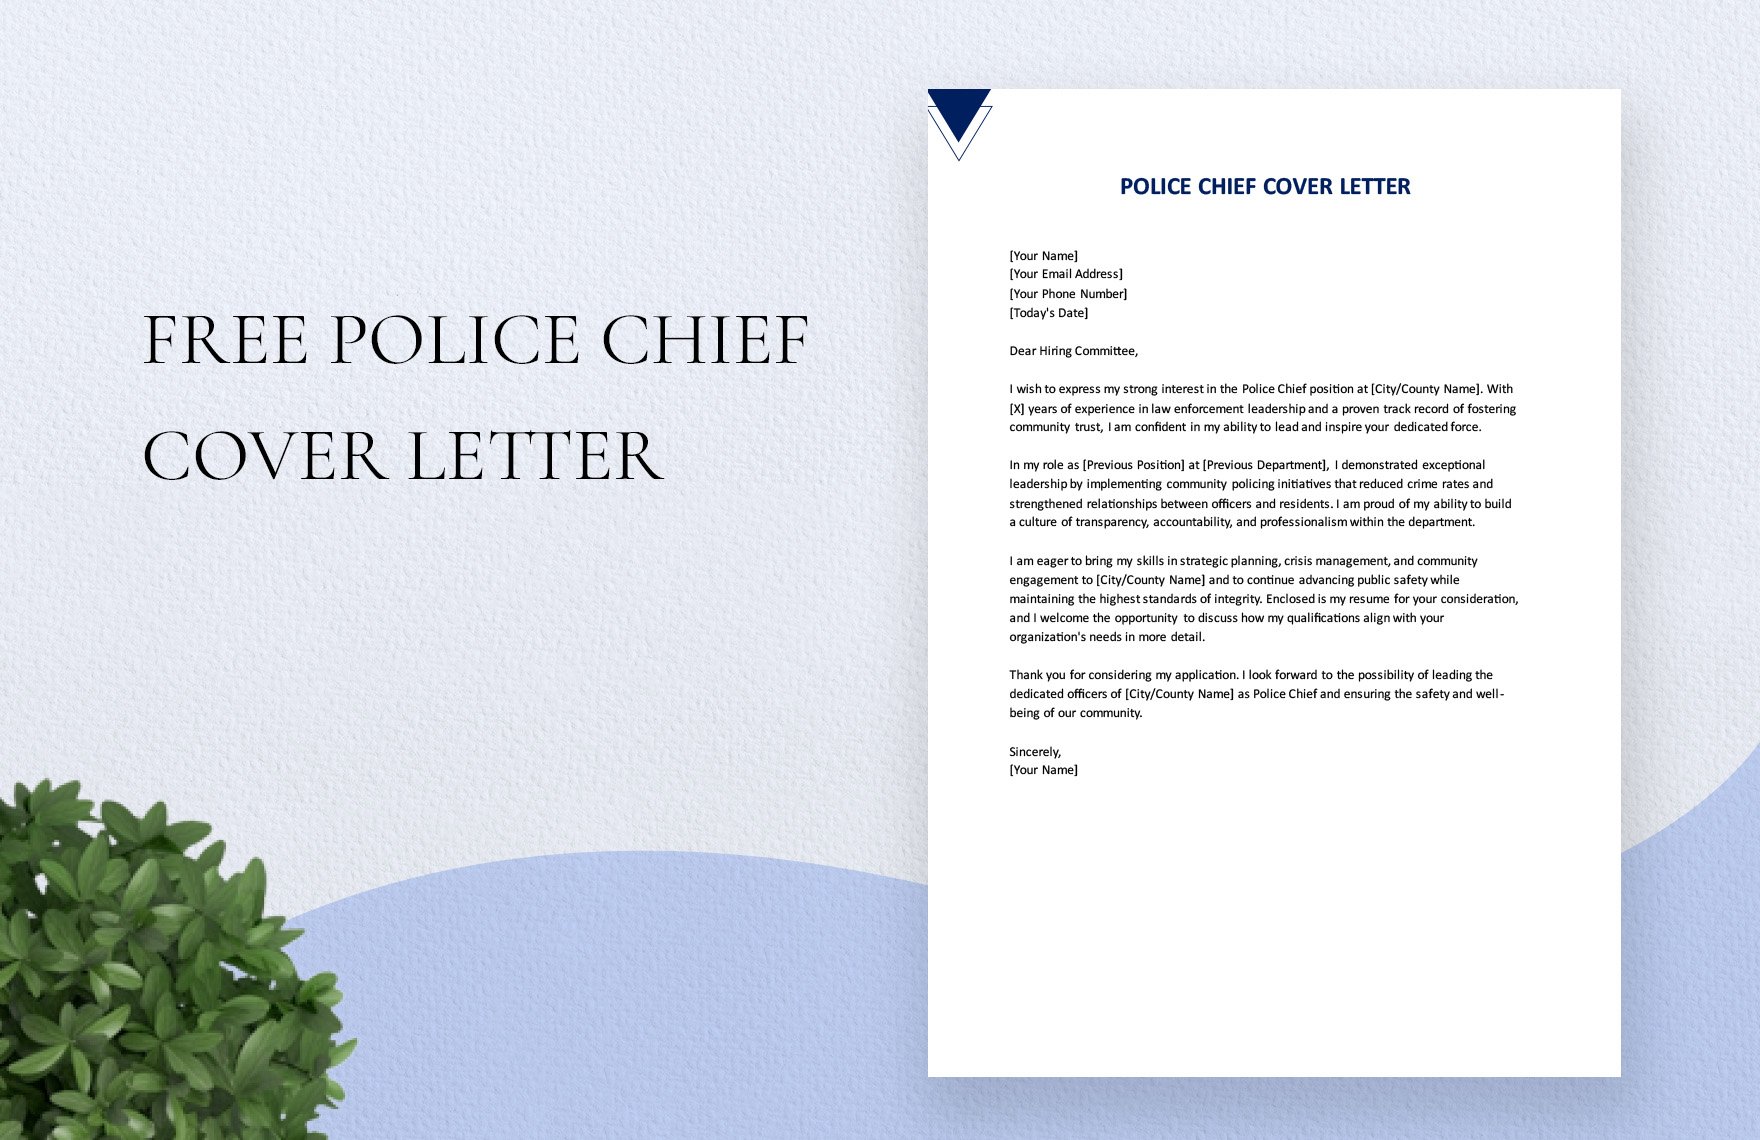 Police Chief Cover Letter in Word, Google Docs, PDF